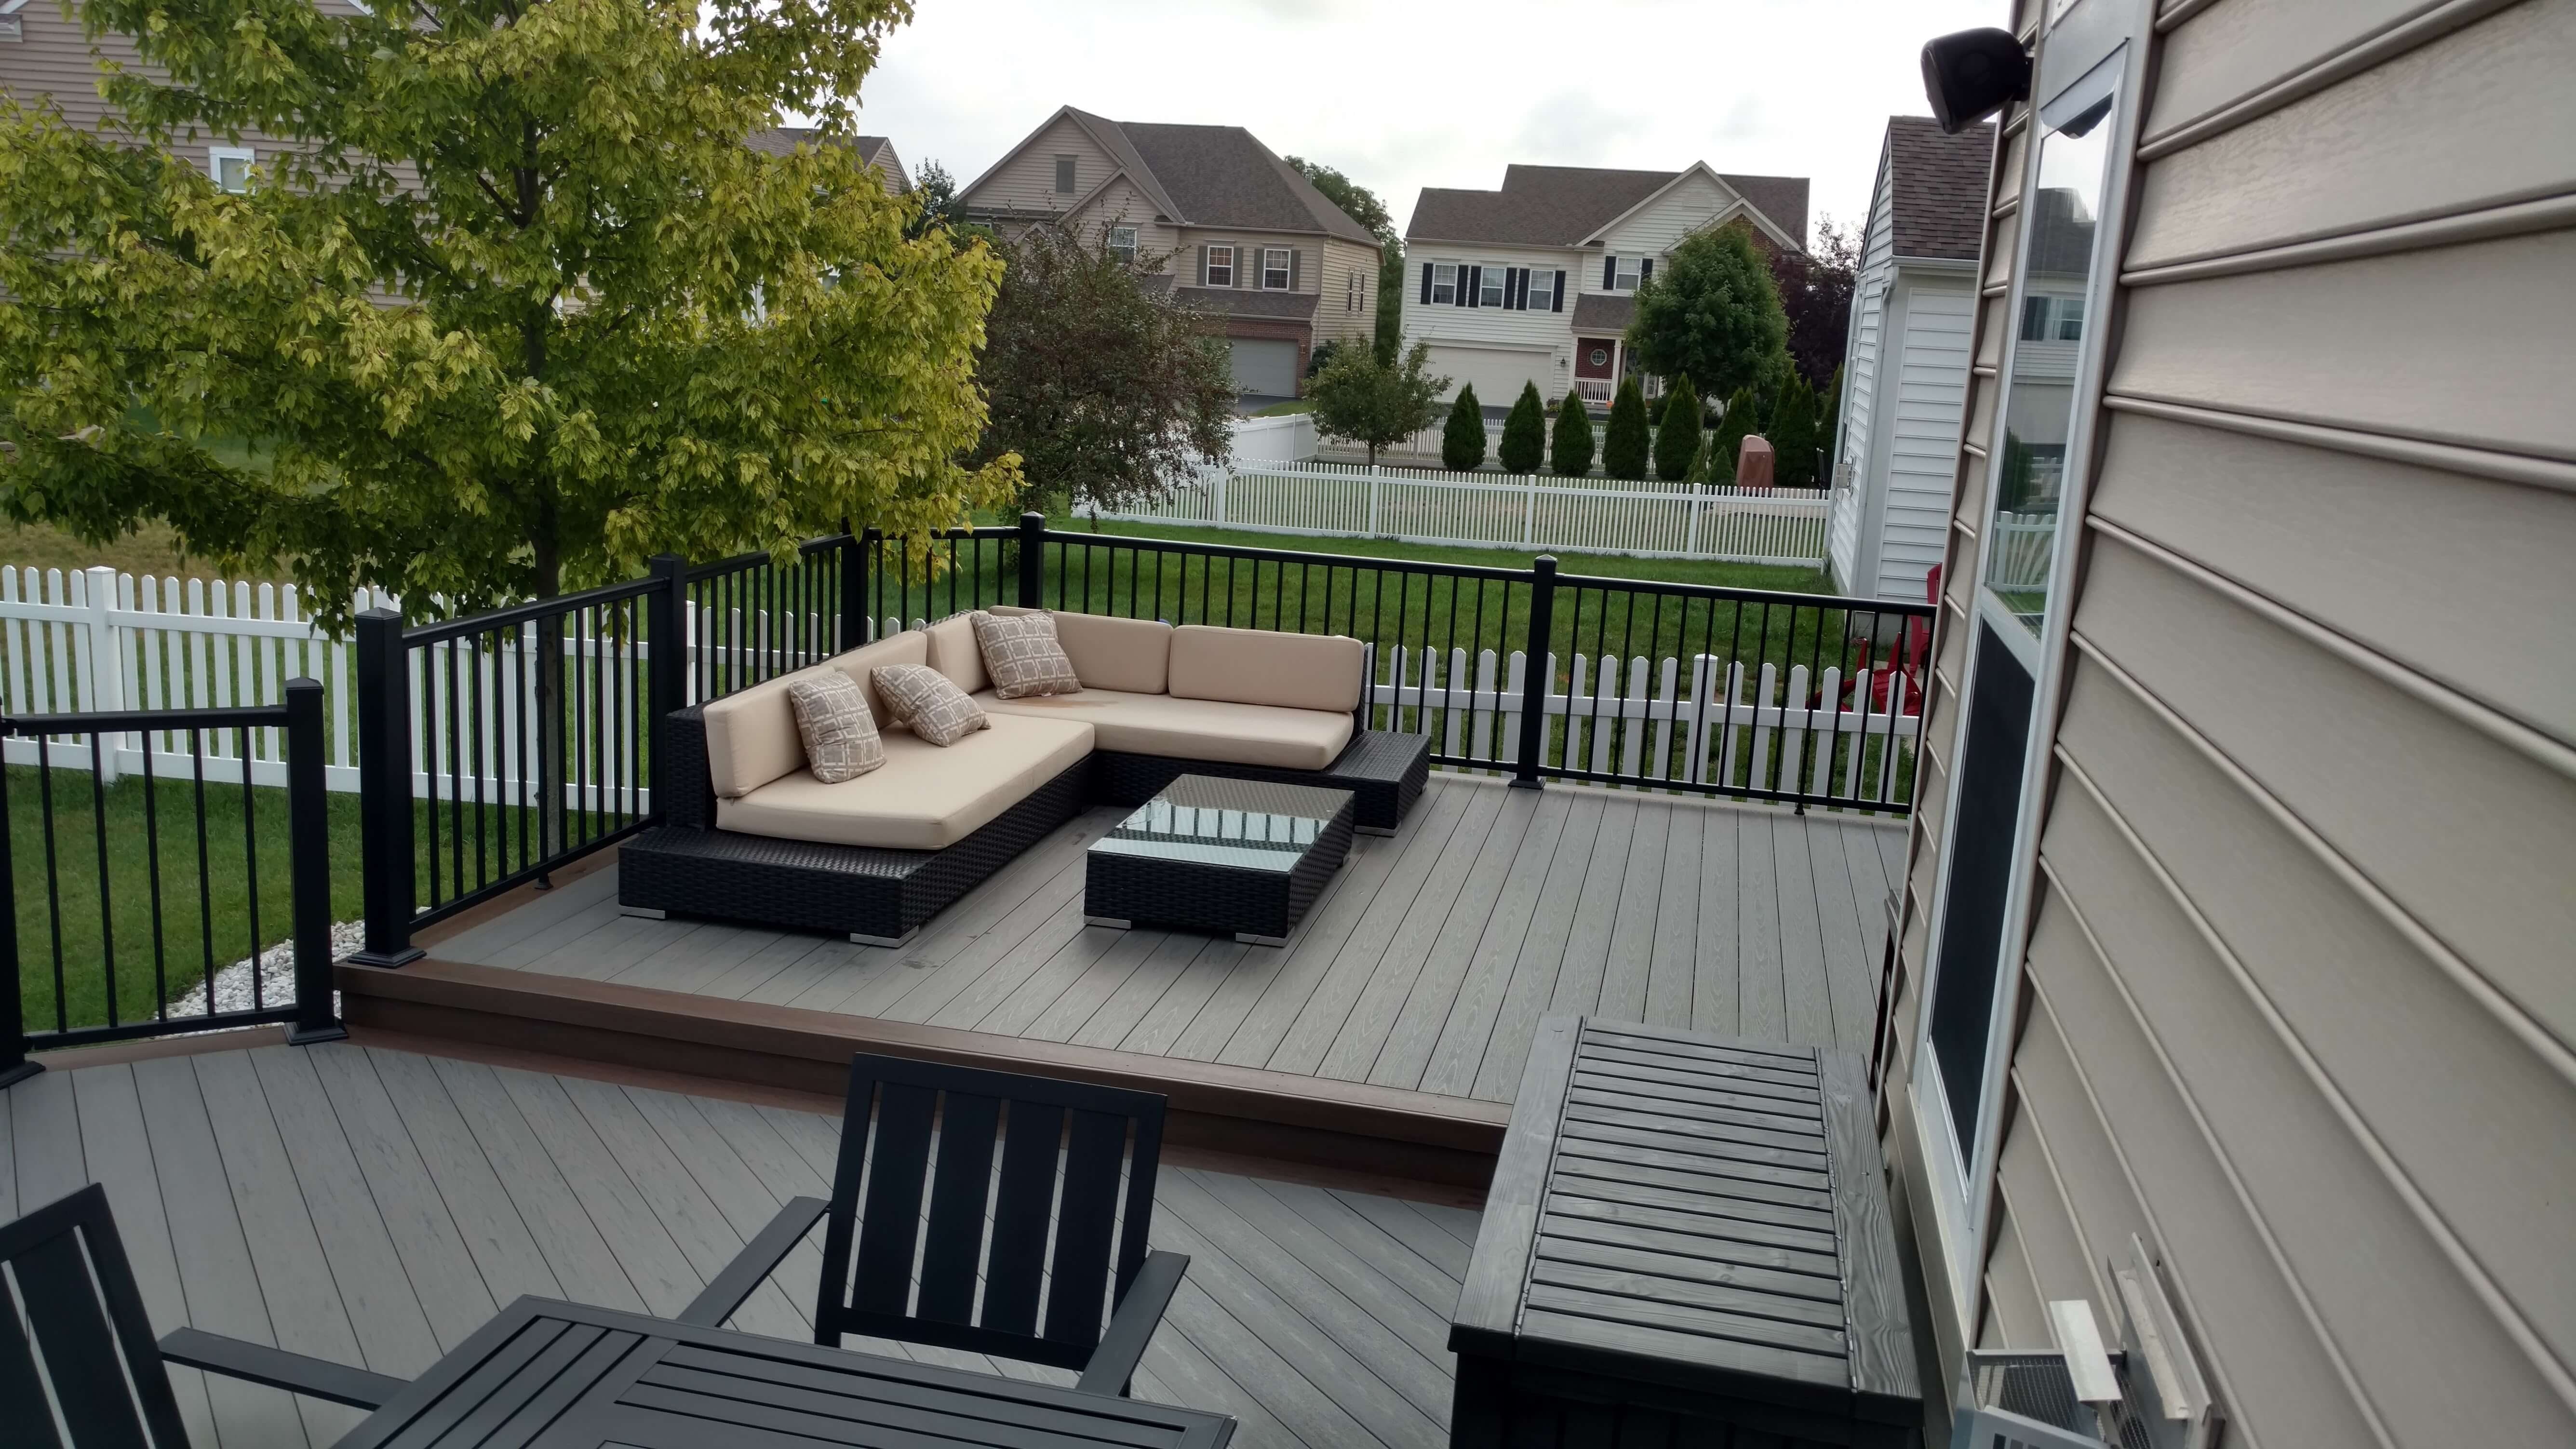 Custom deck with cozy seating area